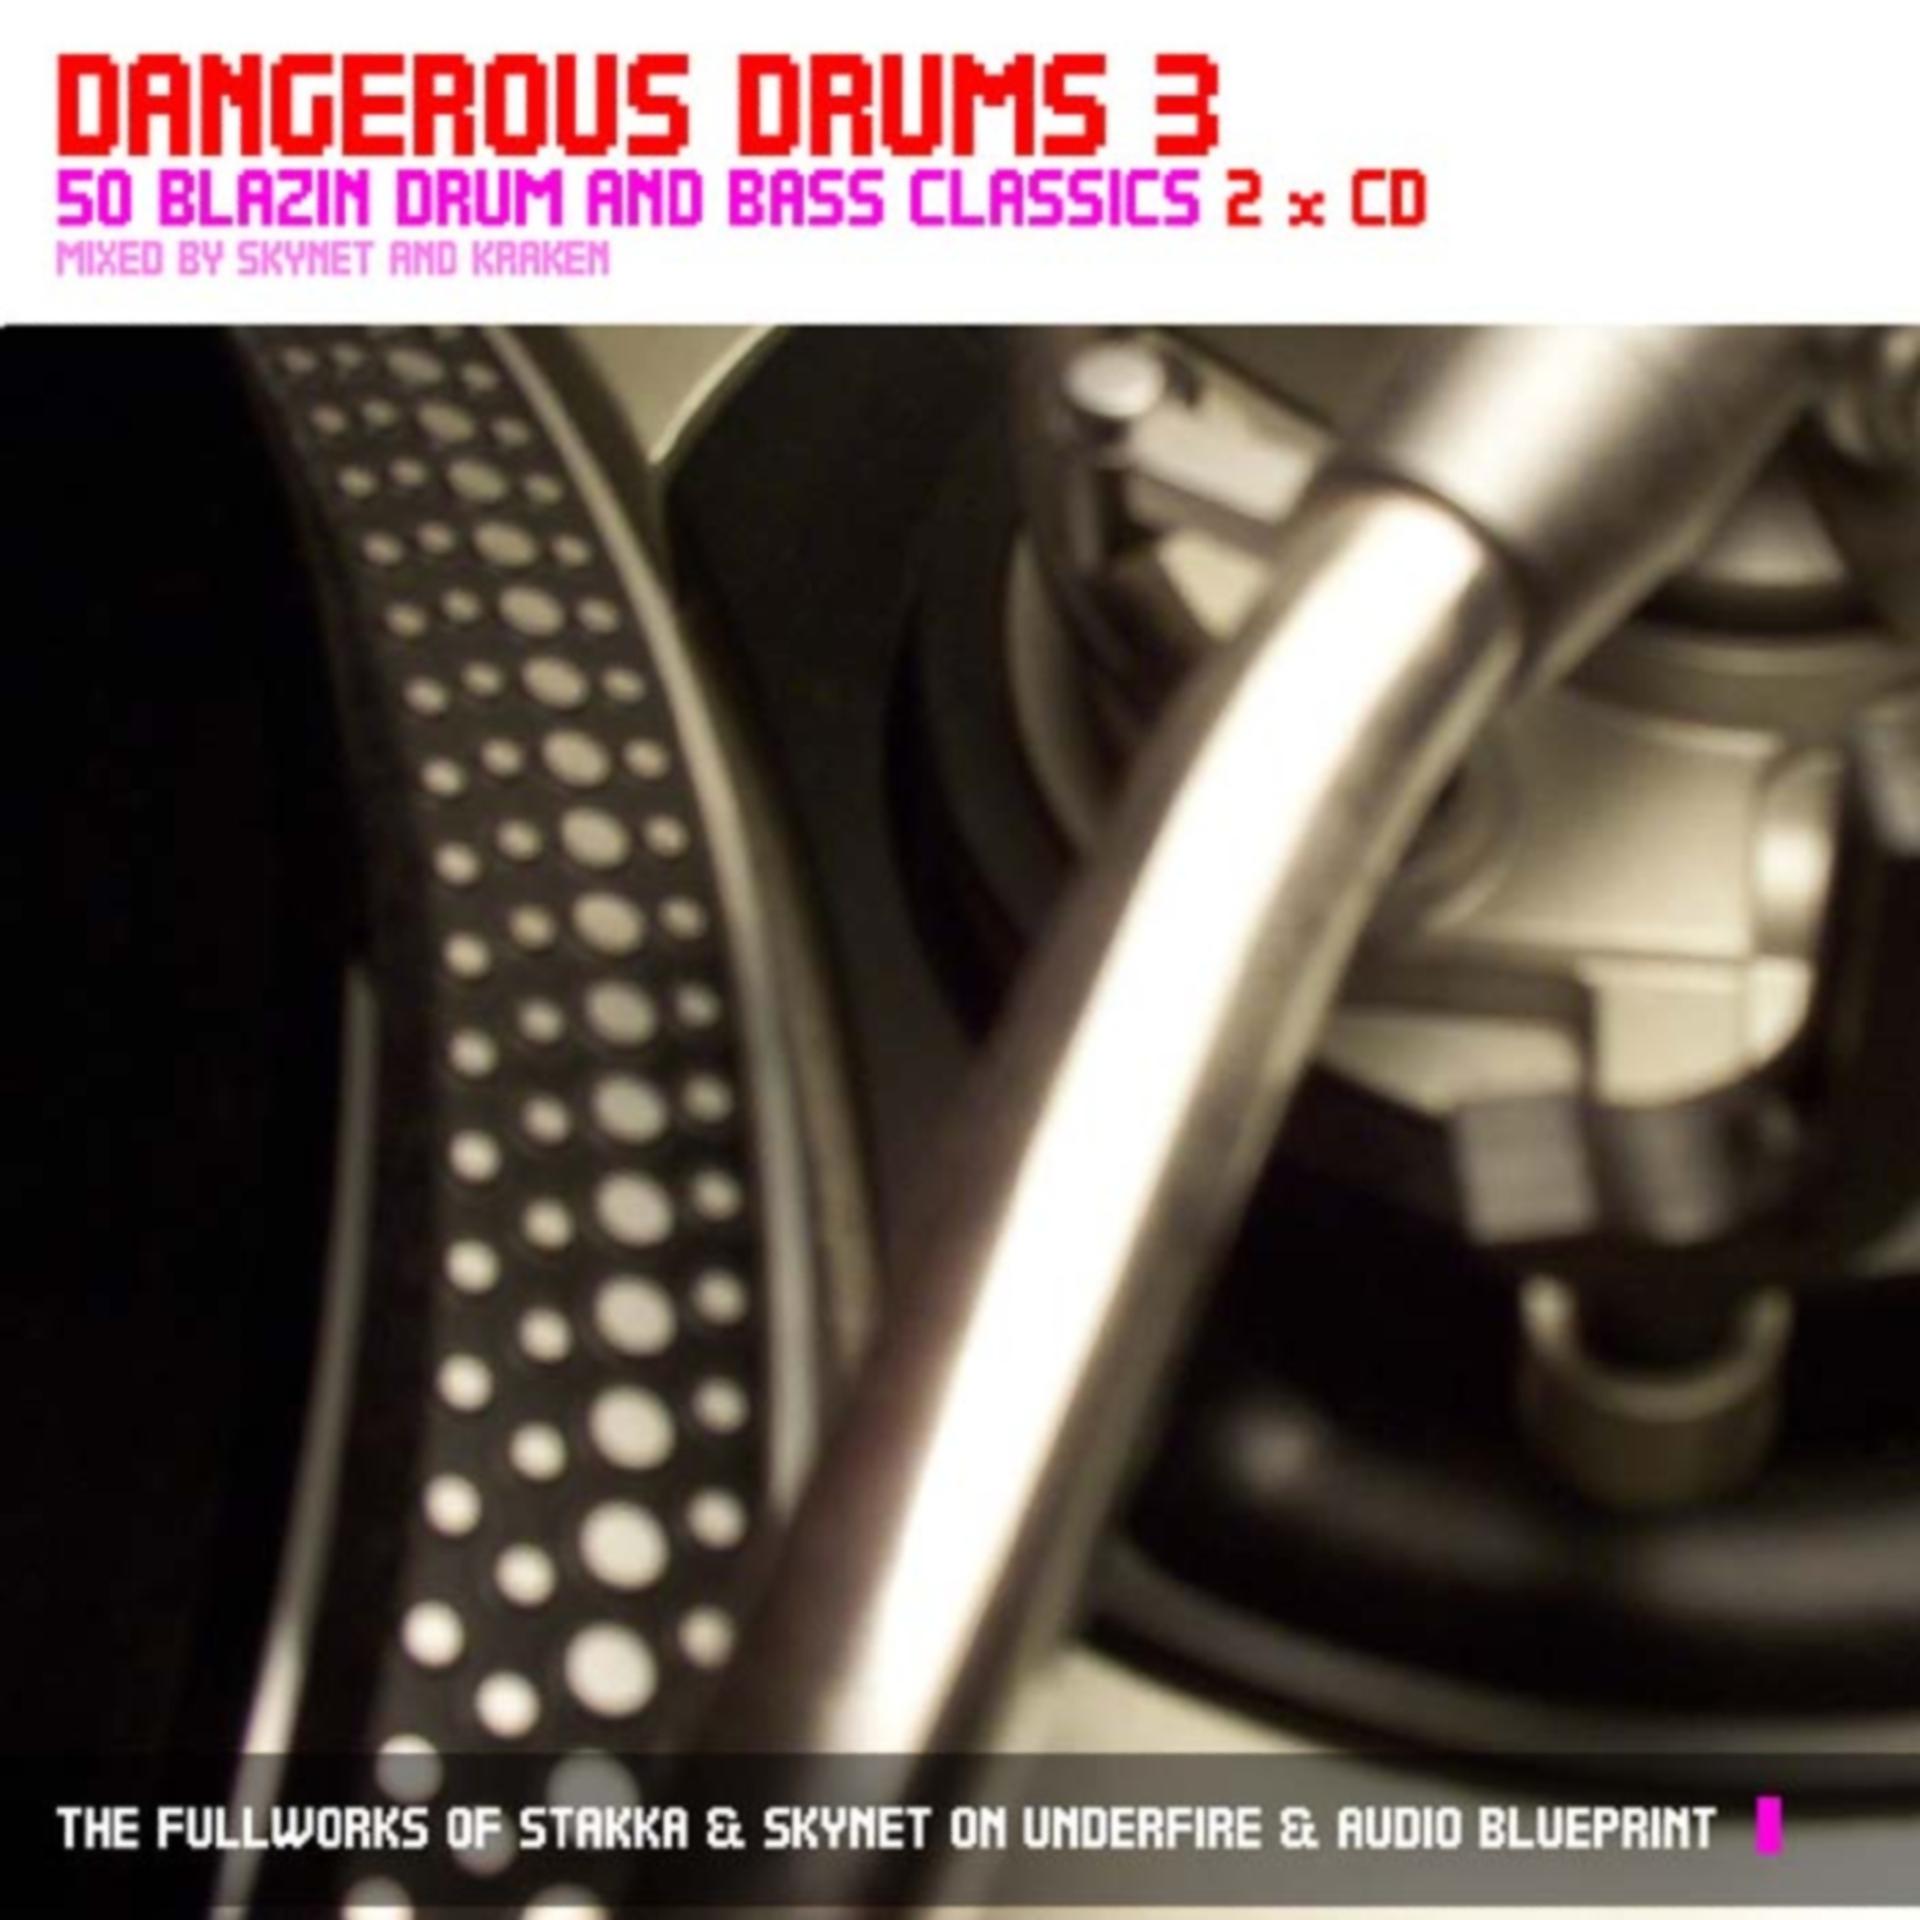 Постер альбома Dangerous Drums 3 (Disc 2) - Mixed by Skynet